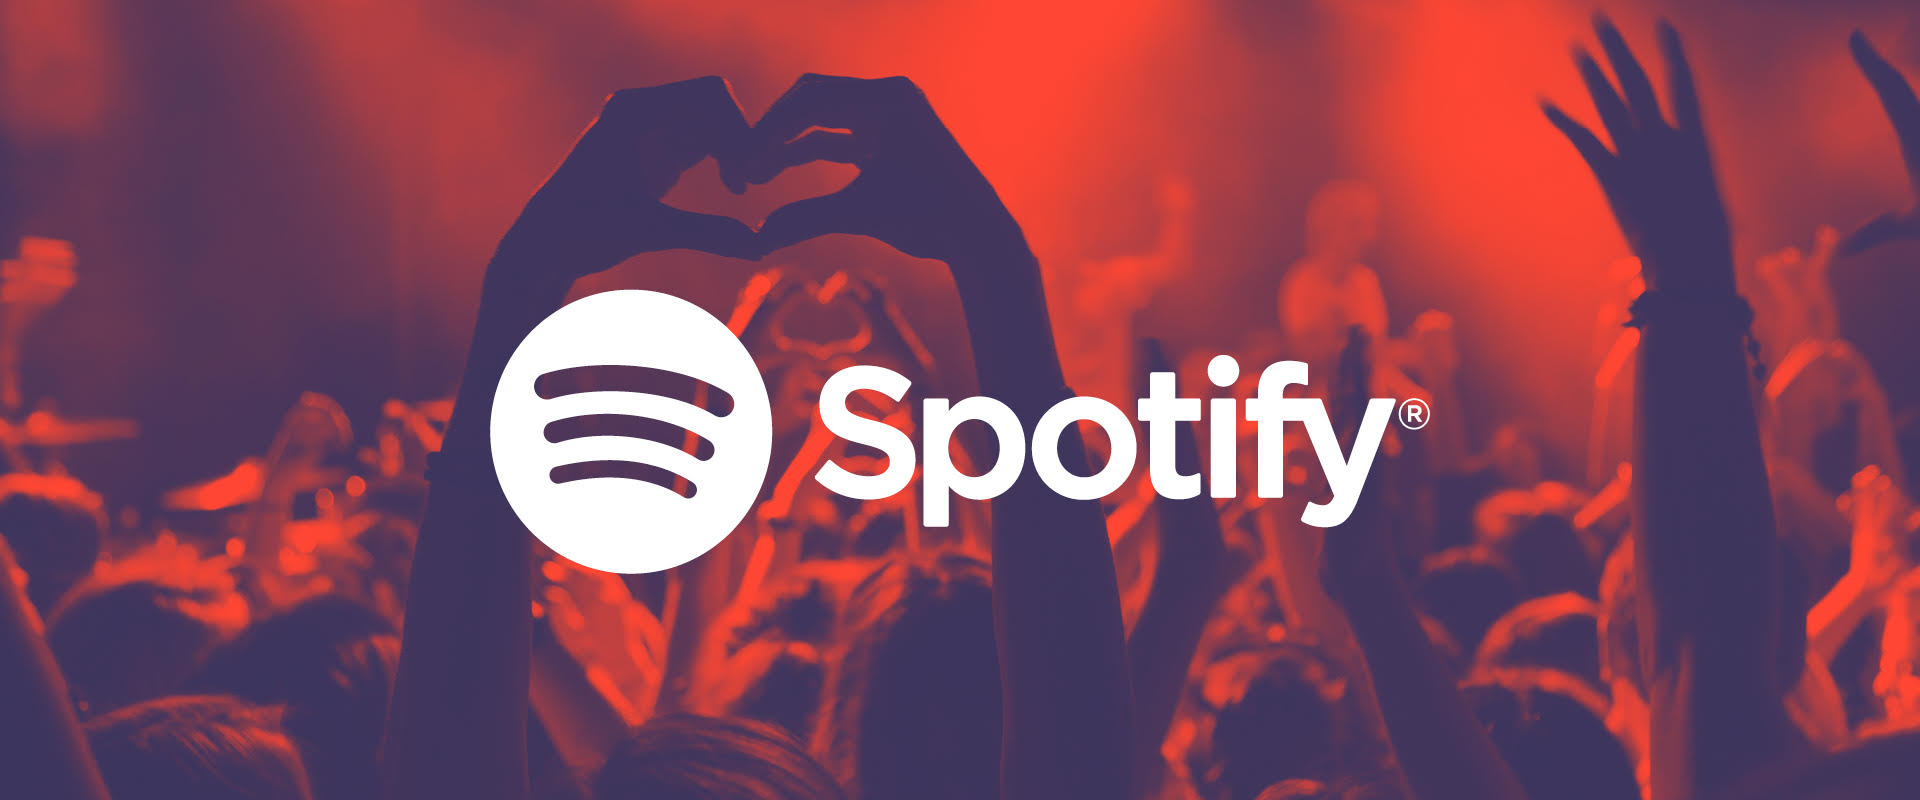 BREAKING: Spotify accidentally confirms launch day in India